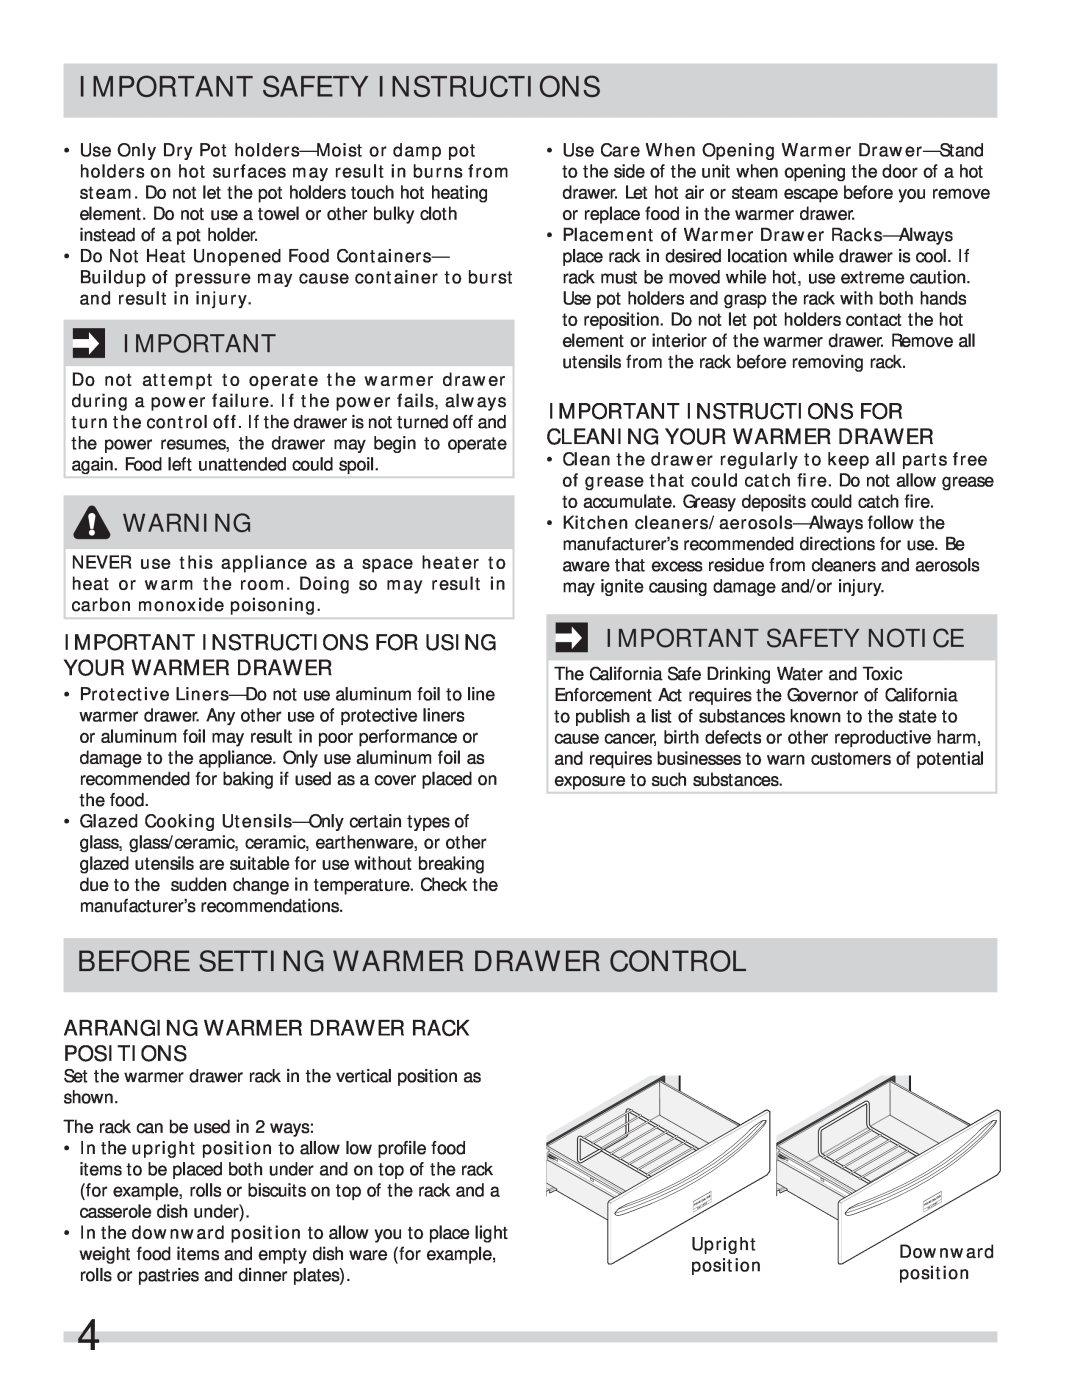 Frigidaire 318201028 Before Setting Warmer Drawer Control, Important Safety Notice, Arranging Warmer Drawer Rack Positions 